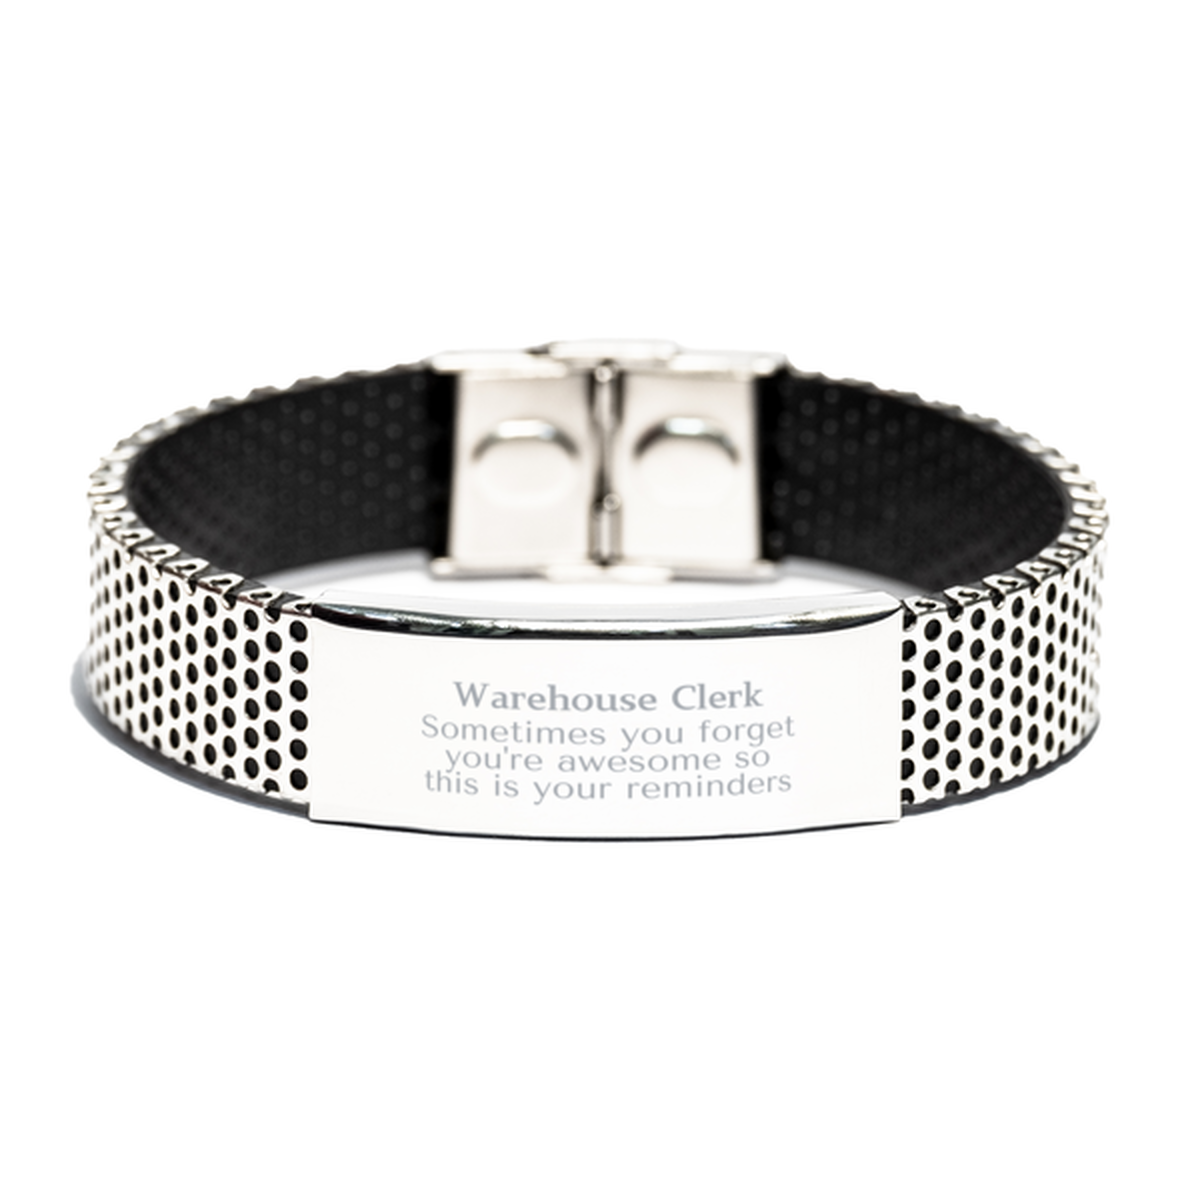 Sentimental Warehouse Clerk Stainless Steel Bracelet, Warehouse Clerk Sometimes you forget you're awesome so this is your reminders, Graduation Christmas Birthday Gifts for Warehouse Clerk, Men, Women, Coworkers